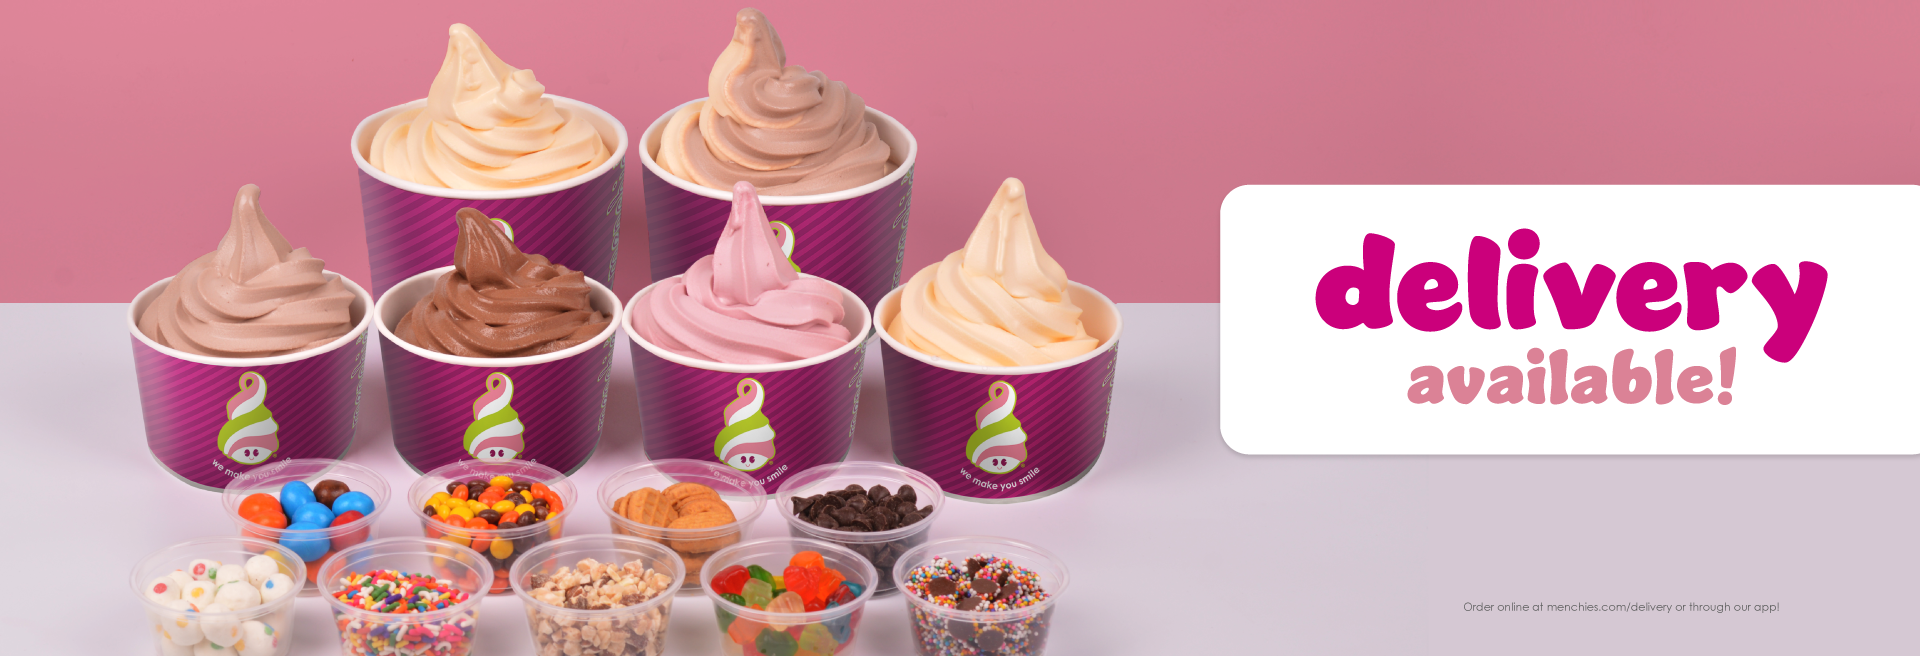 Satisfy your ice cream cravings with a Menchie’s delivery!